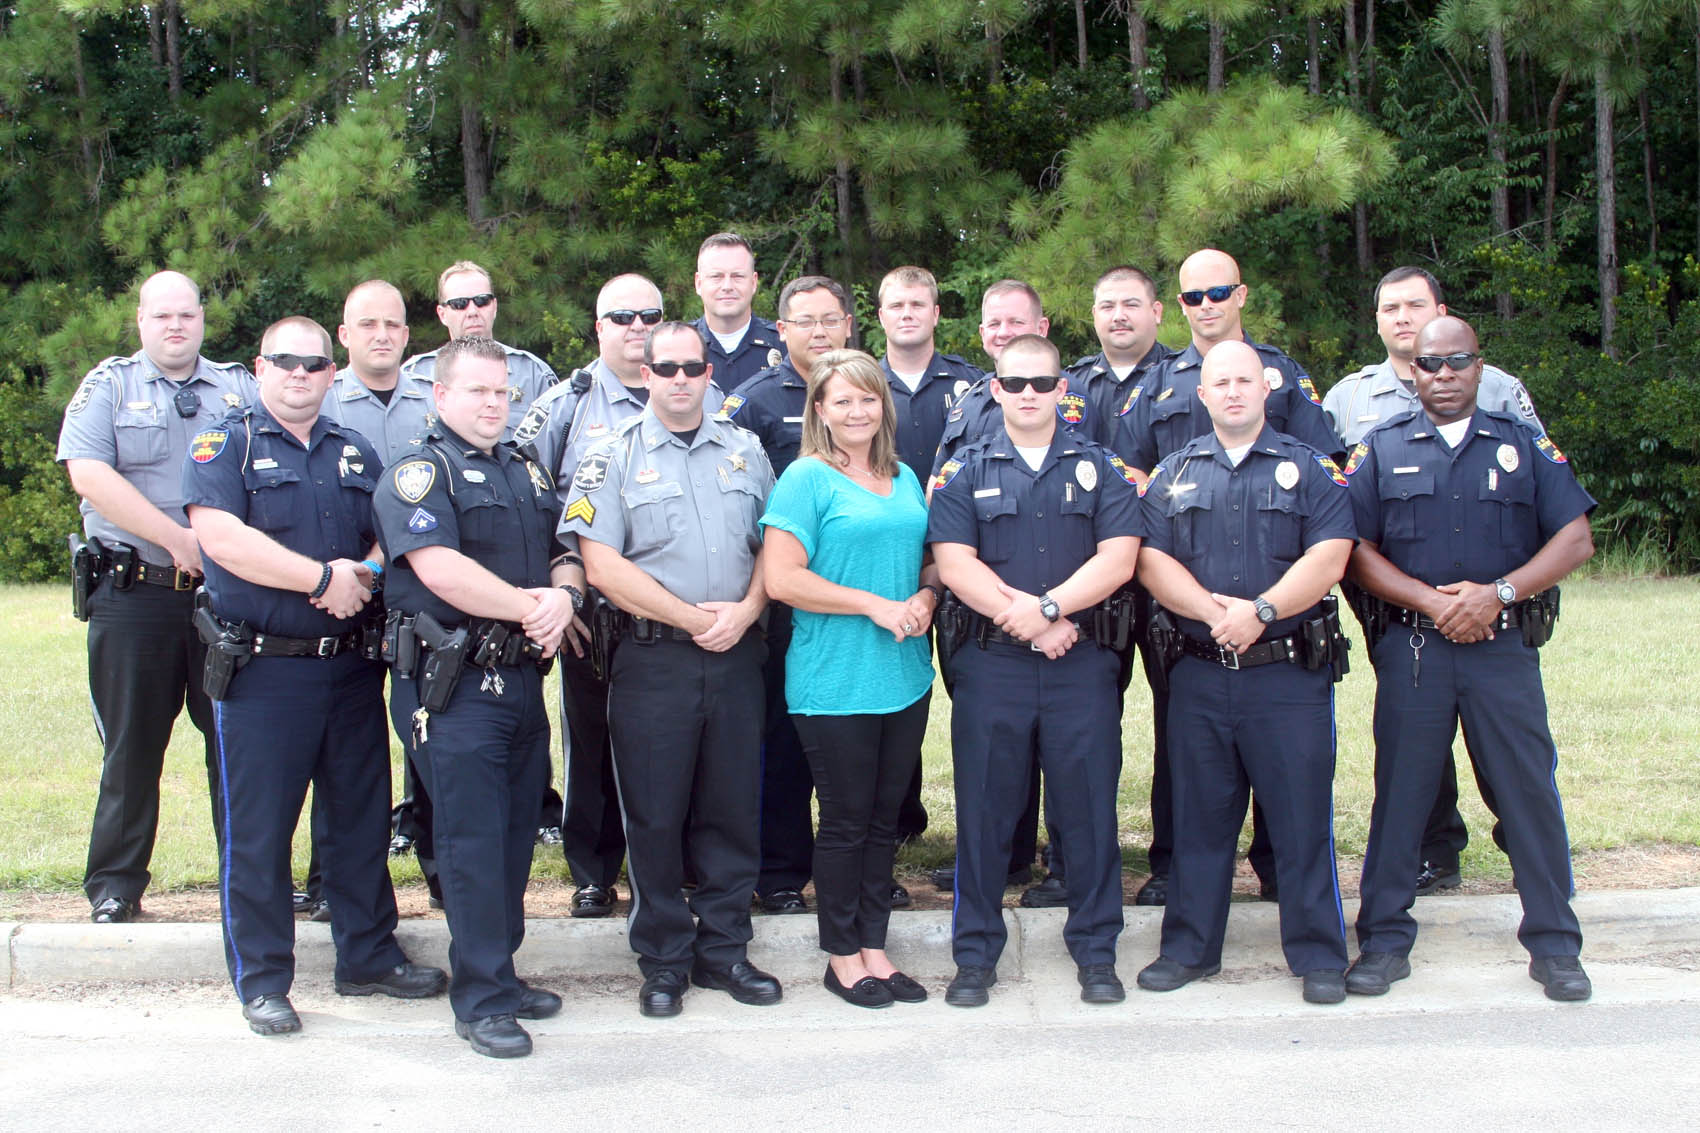 Click to enlarge,  Recent graduates of the Lee County Crisis Intervention Team training program were, left to right: front row, William Gardner, Anthony Norton, Kenneth Gilstrap, Audrey Baker, Mitchell Coggins, Johnathan Dorman and William Heck; back; row, Zachary Petty, Jerod Kirk, Mitchell Ashley, William Malan, Kenneth Hair, Kenneth Ott, Nathan Snyder, Billy Rodgers, William Kidd, James Young and Charles Jordan. Not pictured is Tyler Bridges. 